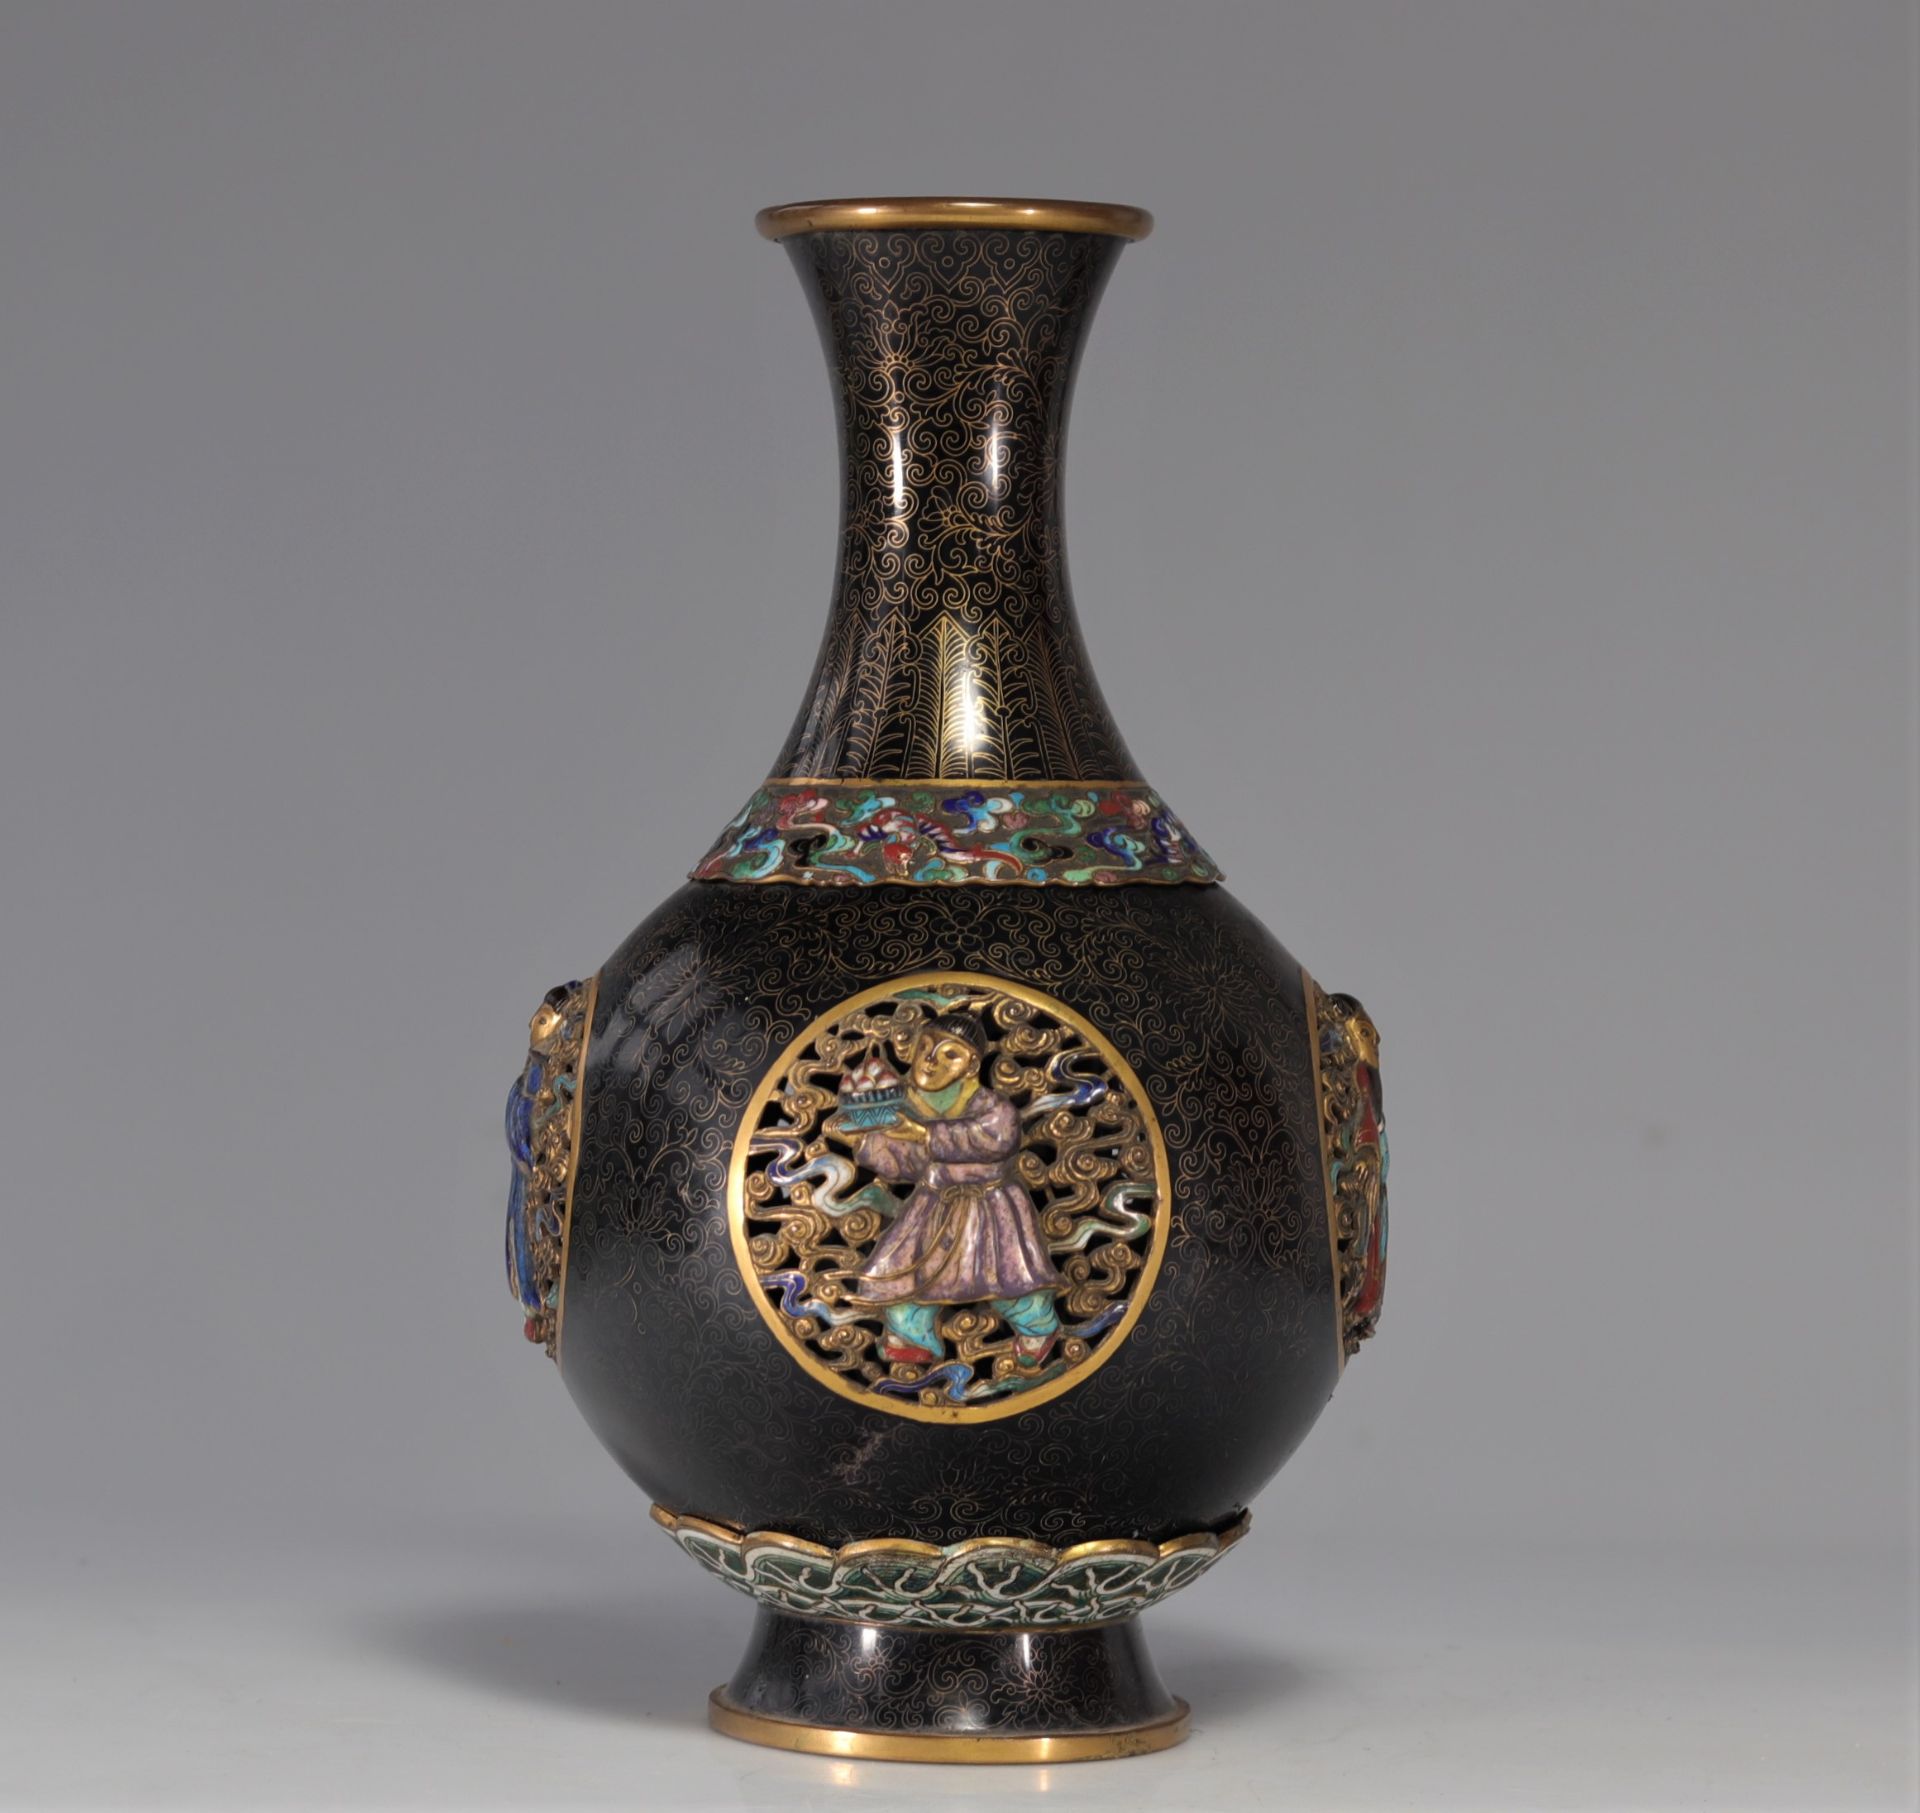 Cloisonne bronze vase decorated with Qing period figures